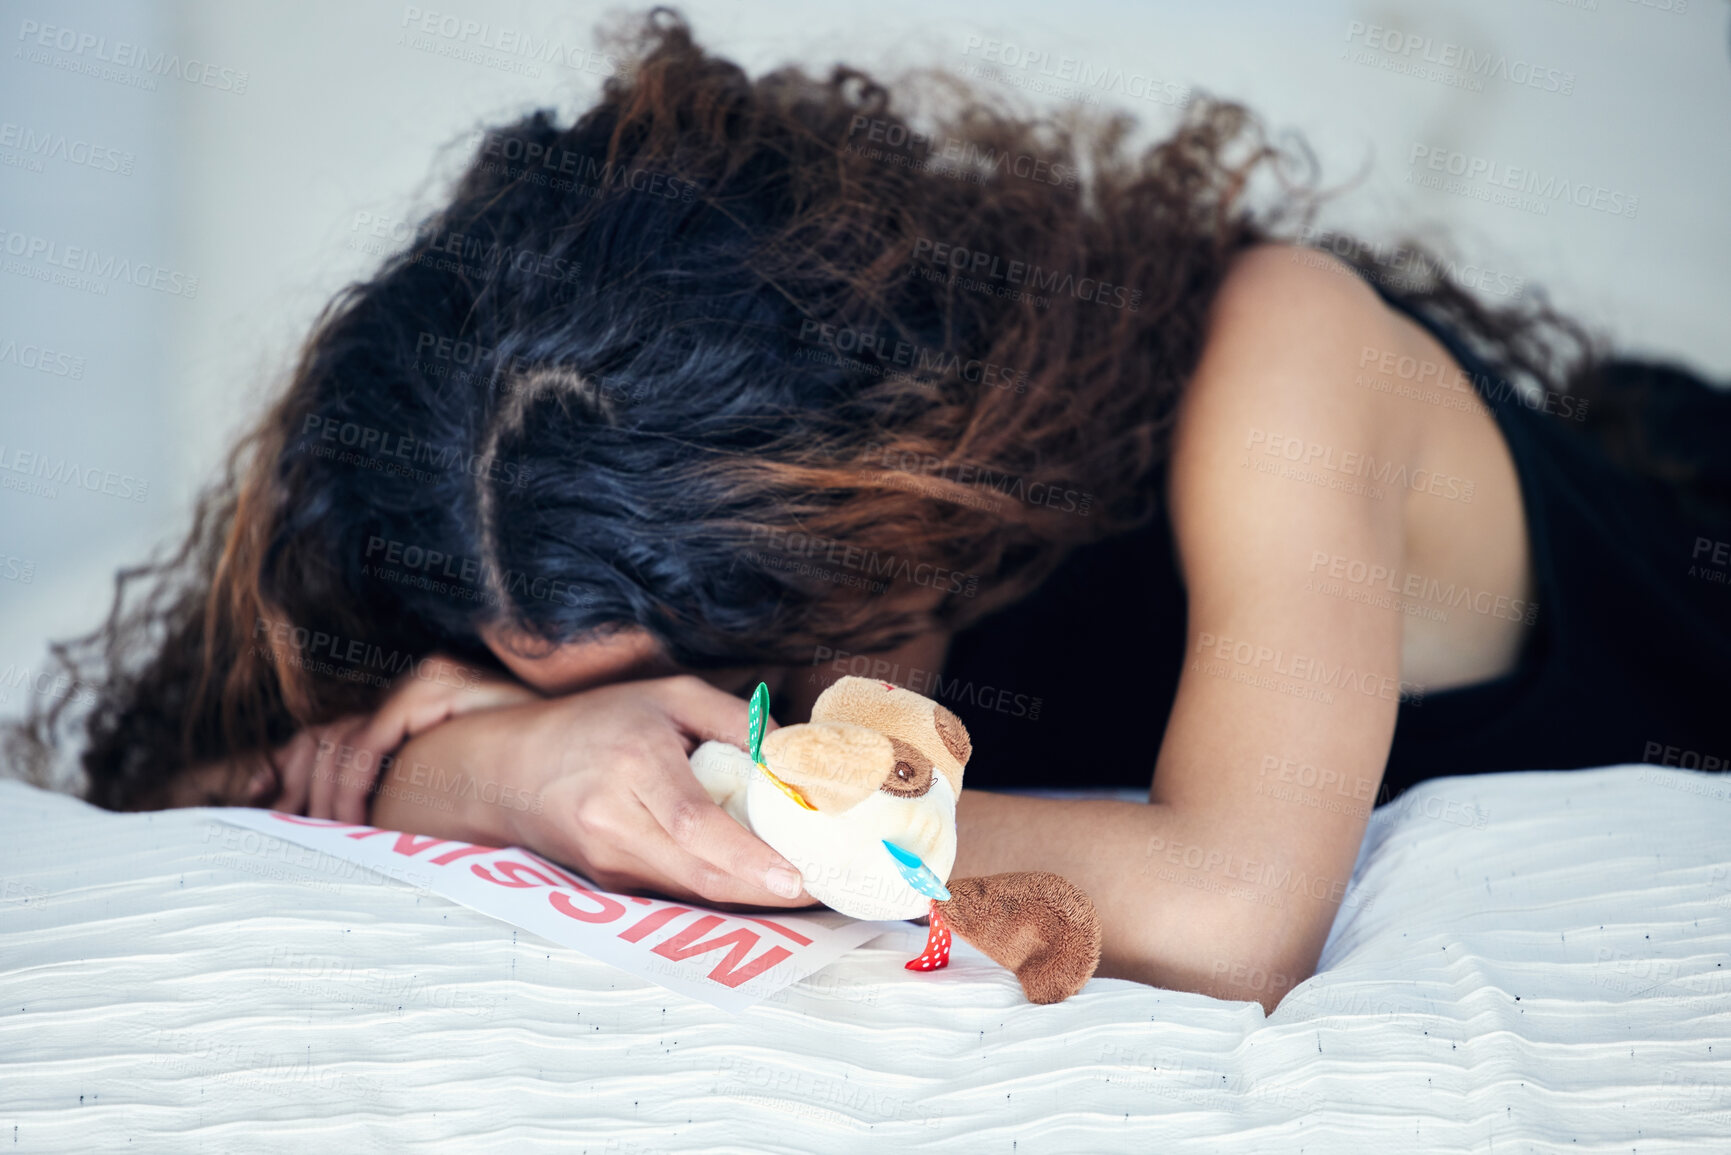 Buy stock photo Shot of a young woman looking sad while holding a teddy bear and lying on a bed alongside a missing person poster